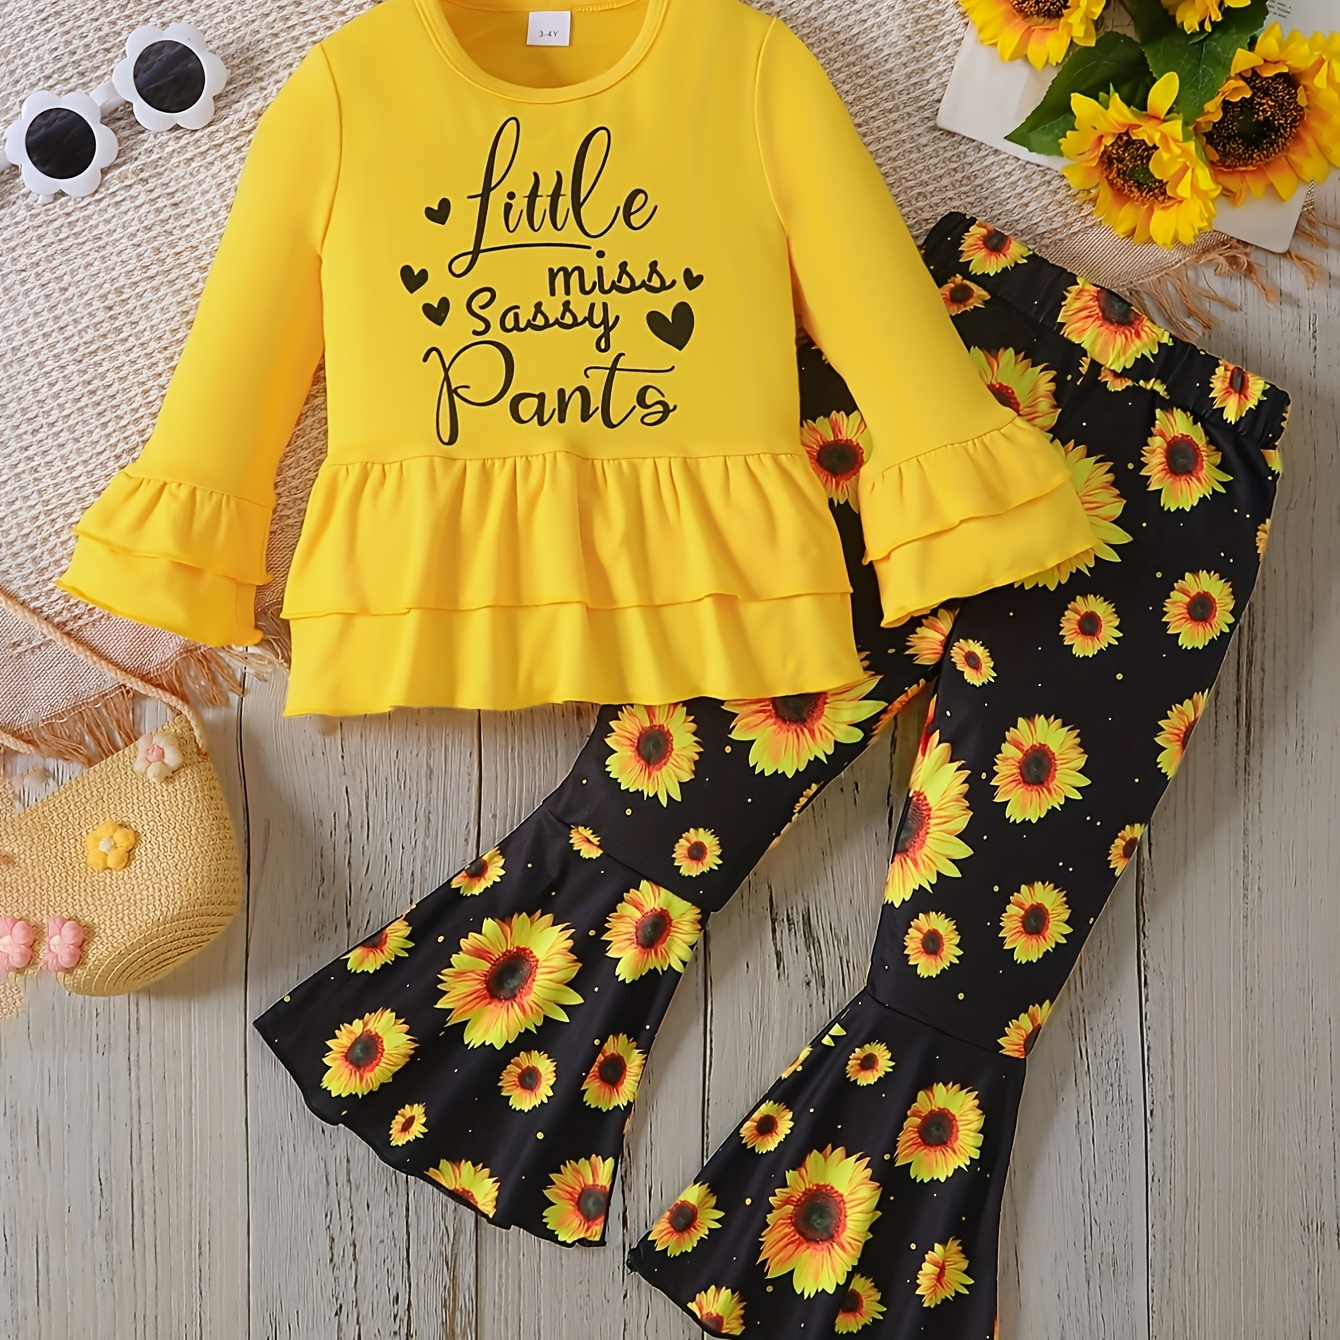 

Girl's Cartoon Sunflower Pattern 2pcs, Long Sleeve Top & Flared Pants Set, Little Miss Sassy Pants Print Ruffle Decor Casual Outfits, Kids Clothes For Spring Fall